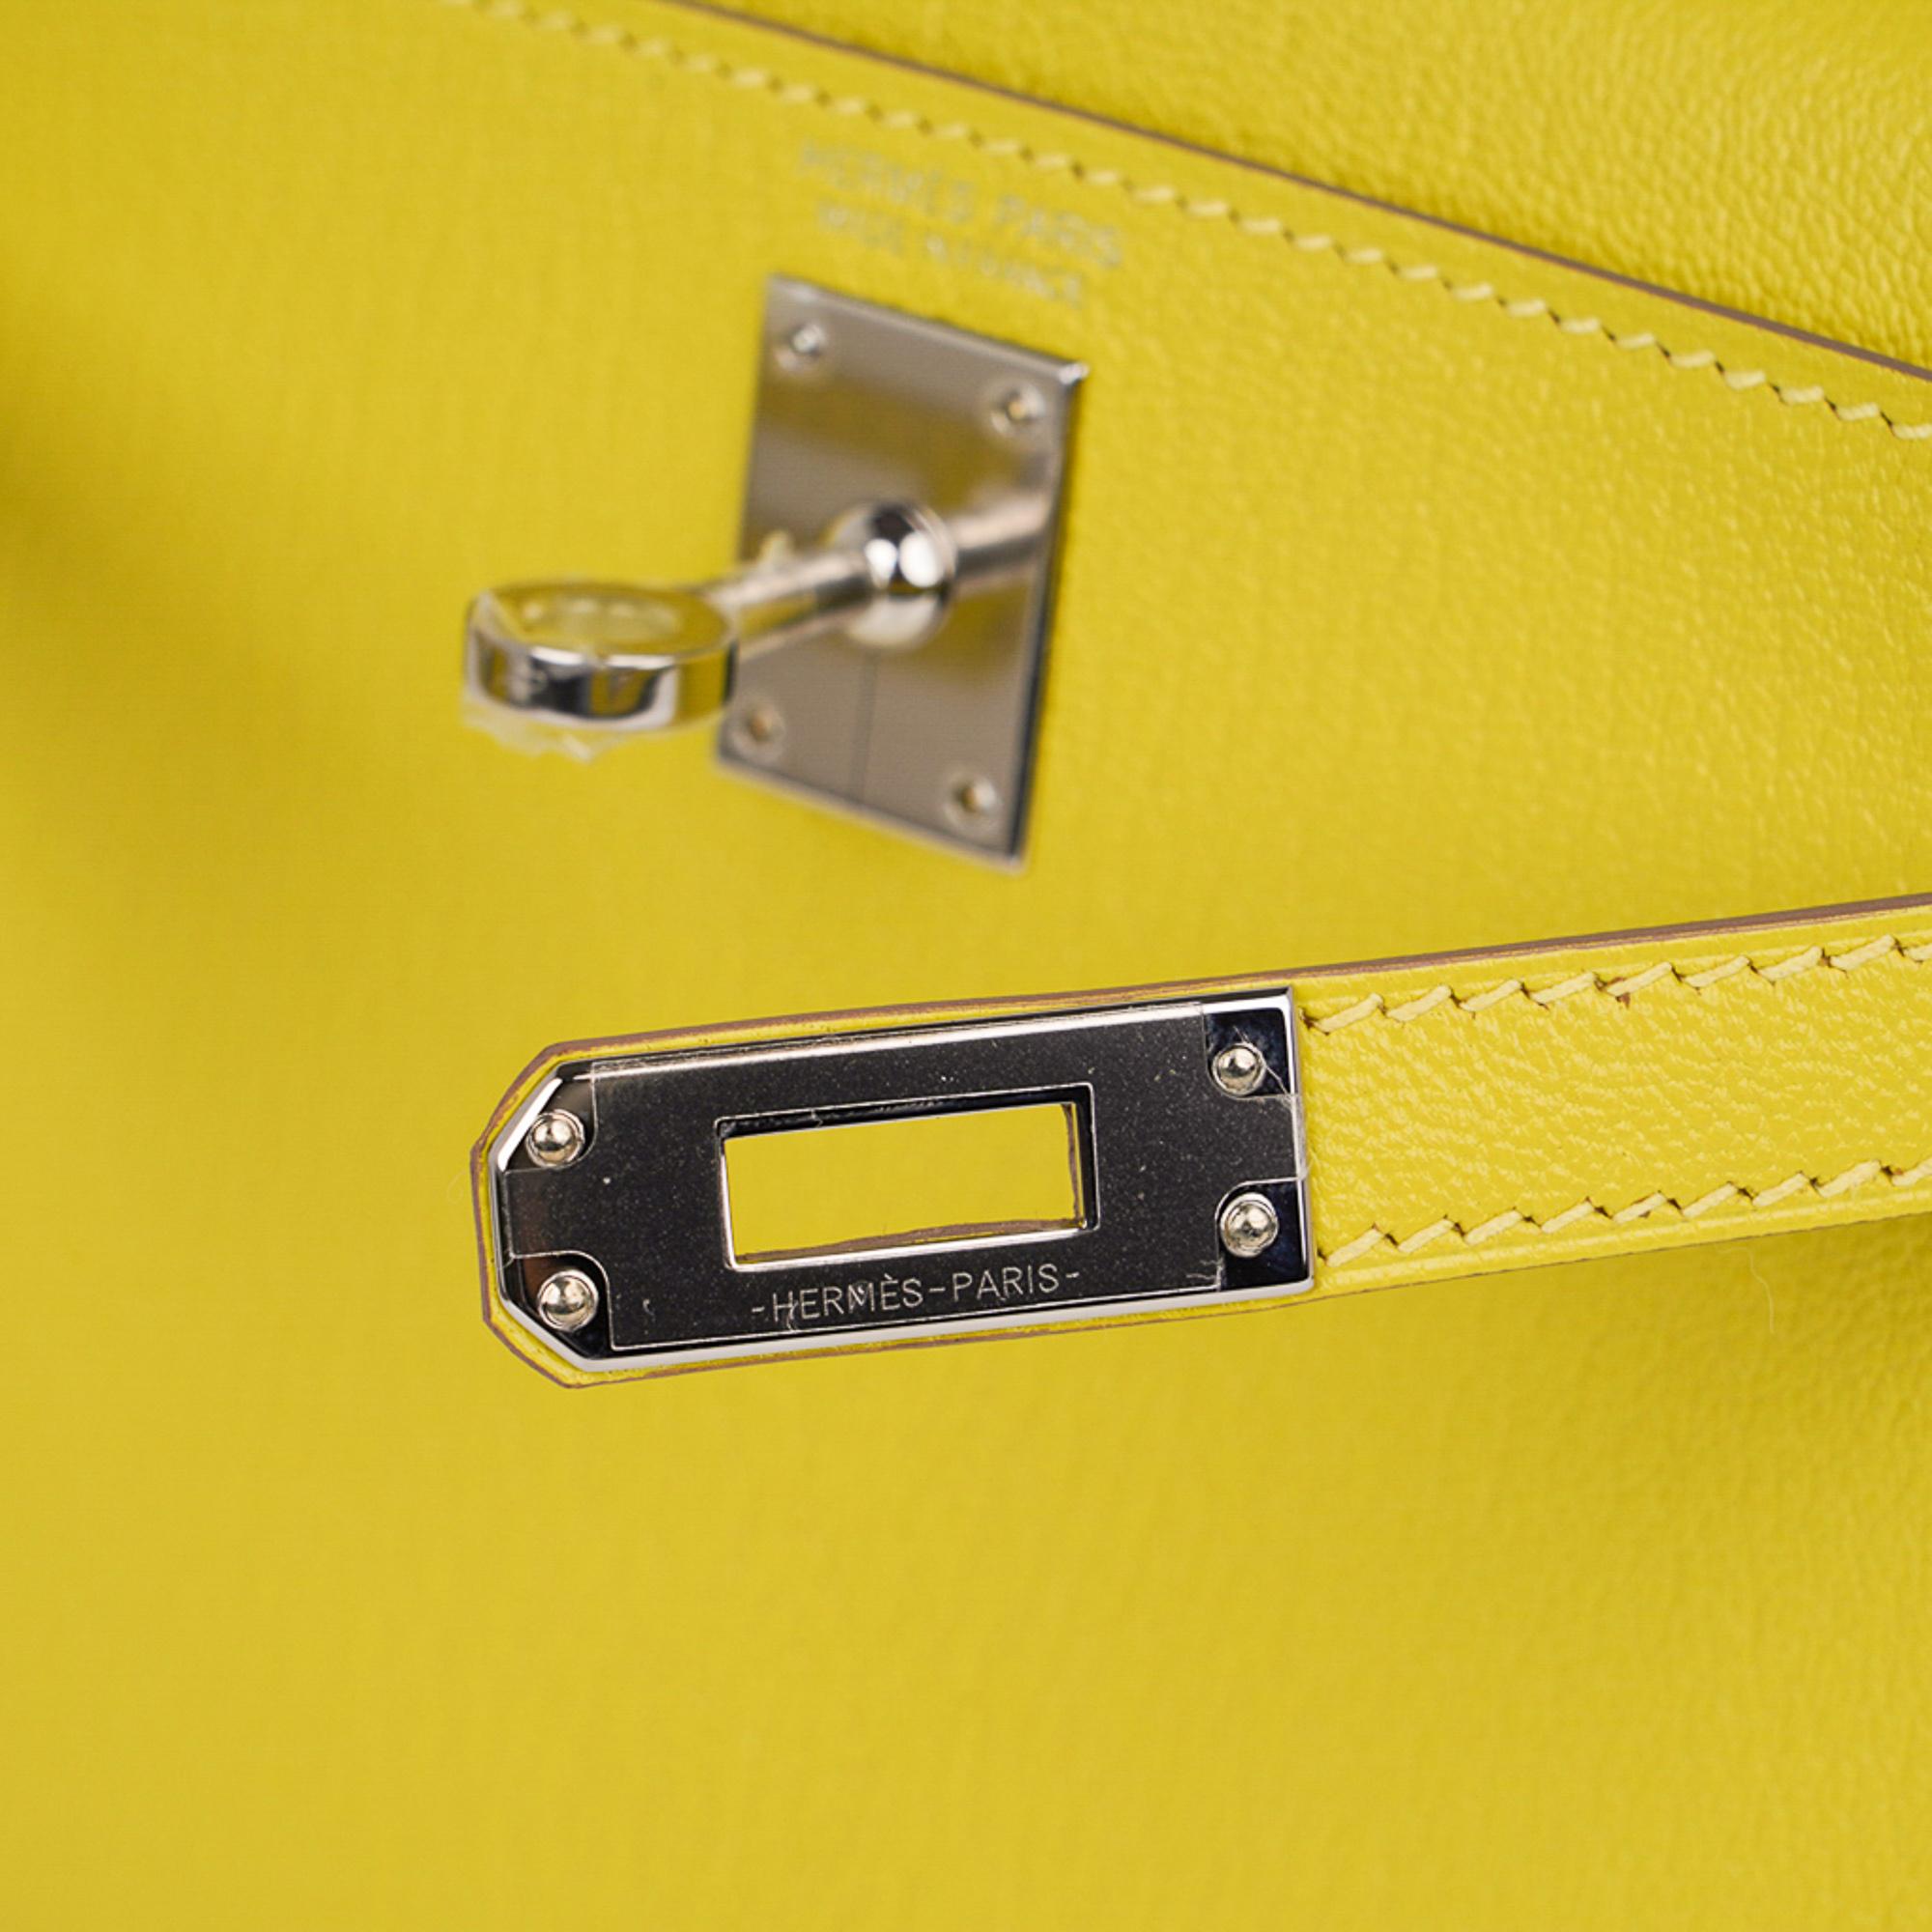 Guaranteed authentic Hermes Kelly 20 Mini Sellier bag featured in fresh Lime yellow. 
Chevre leather accentuated with Palladium hardware.
Comes with signature Hermes box, shoulder strap, and sleeper.
This bag is also available in Deep Blue, Rose